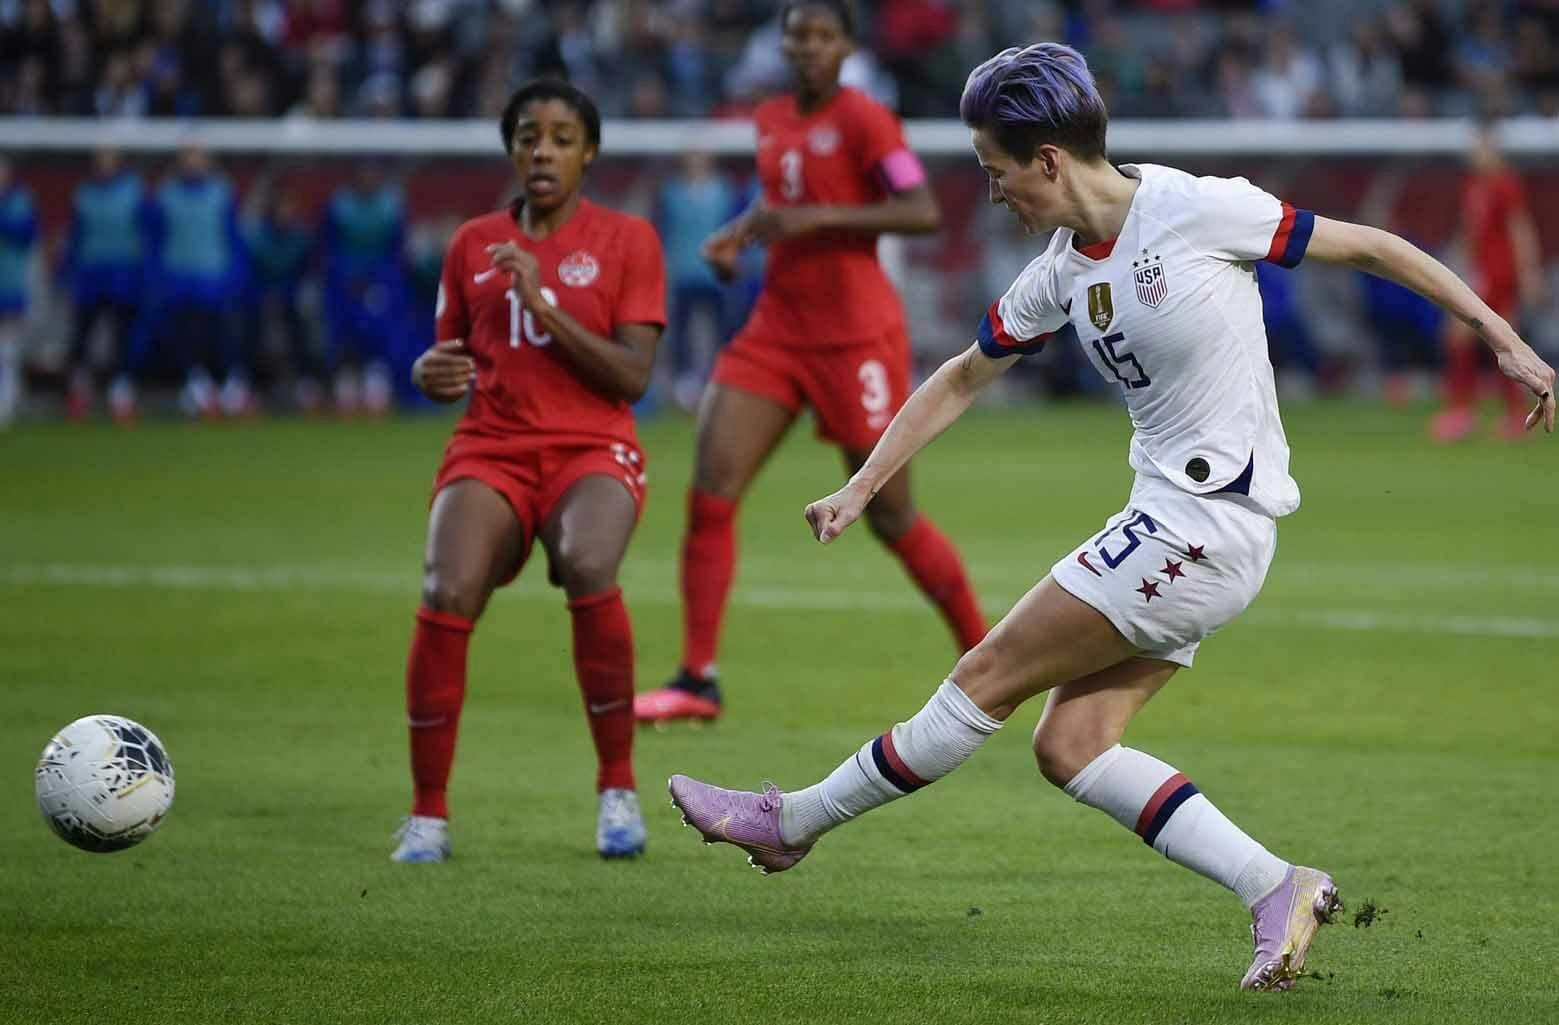 Olympics 2020 squads: USWNT, Team GB & every official women's